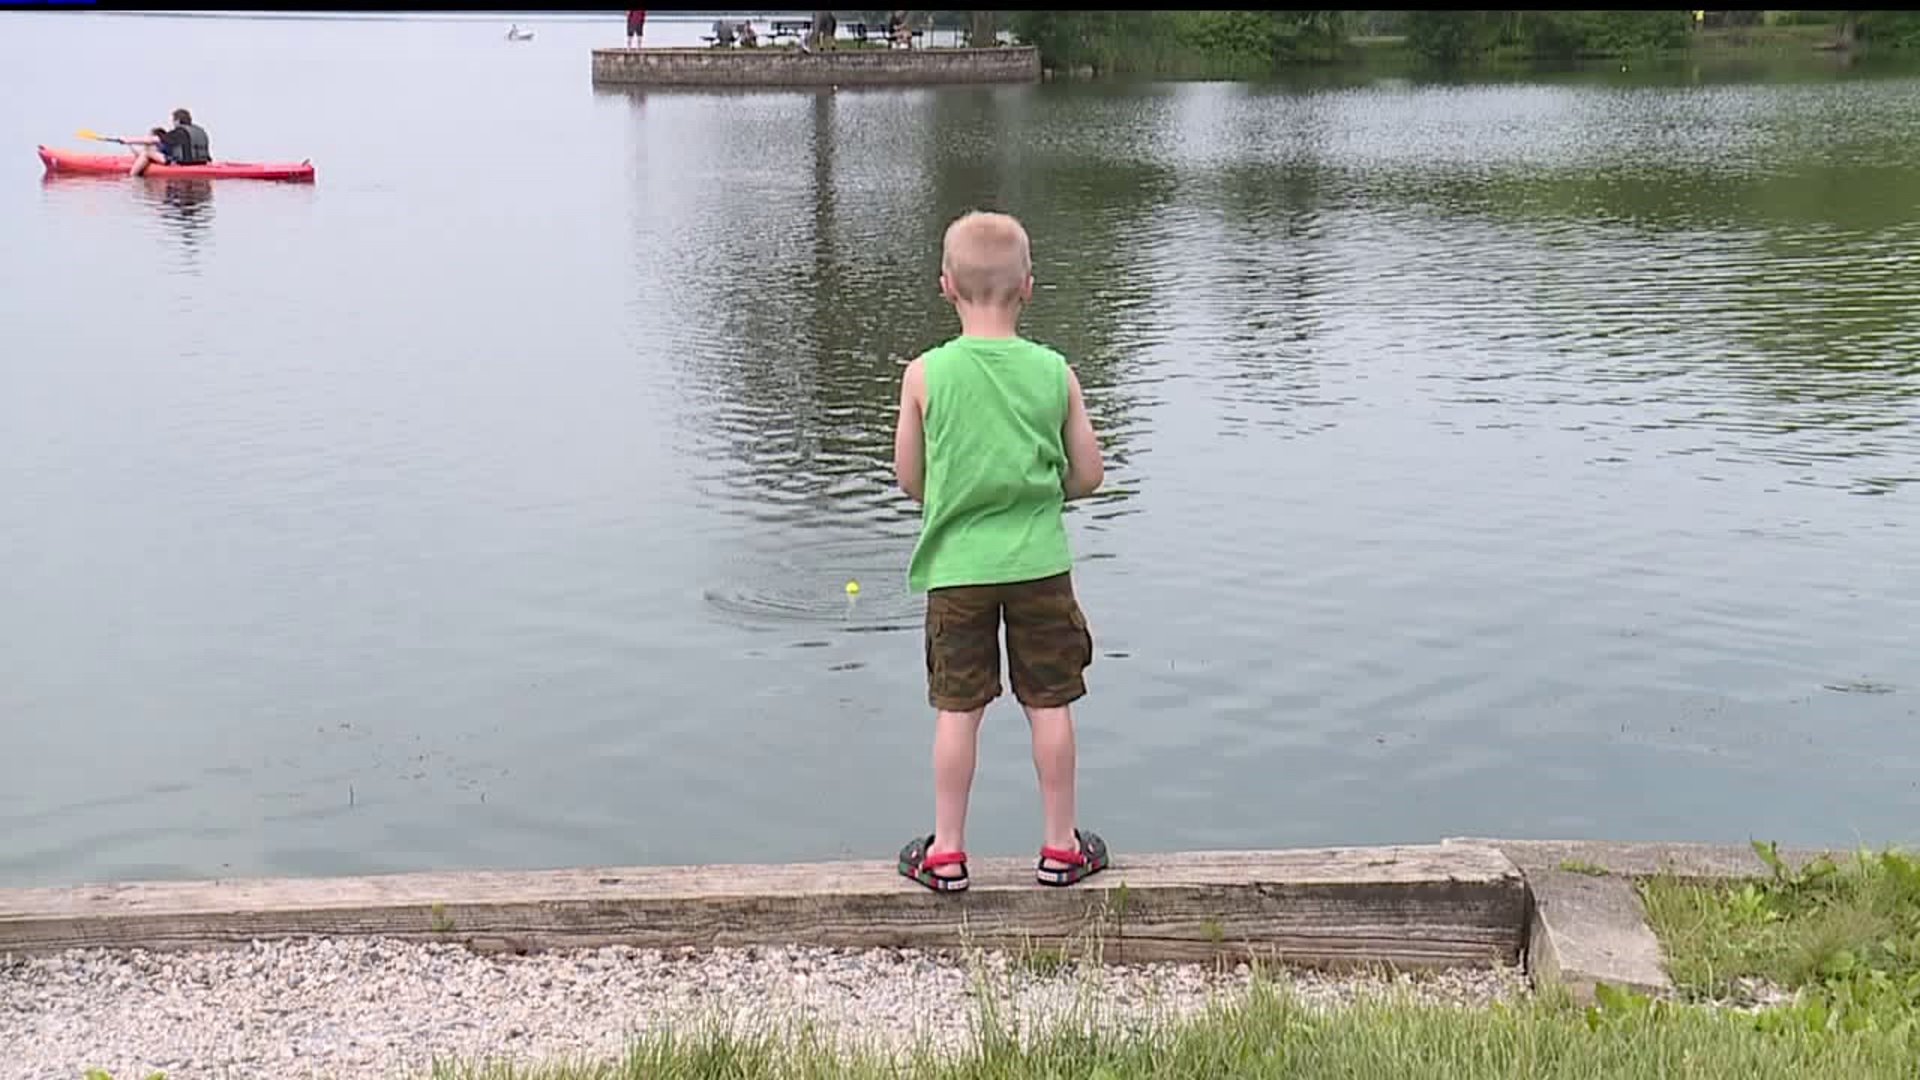 York County state park hooks locals with "Fish for Free Day"